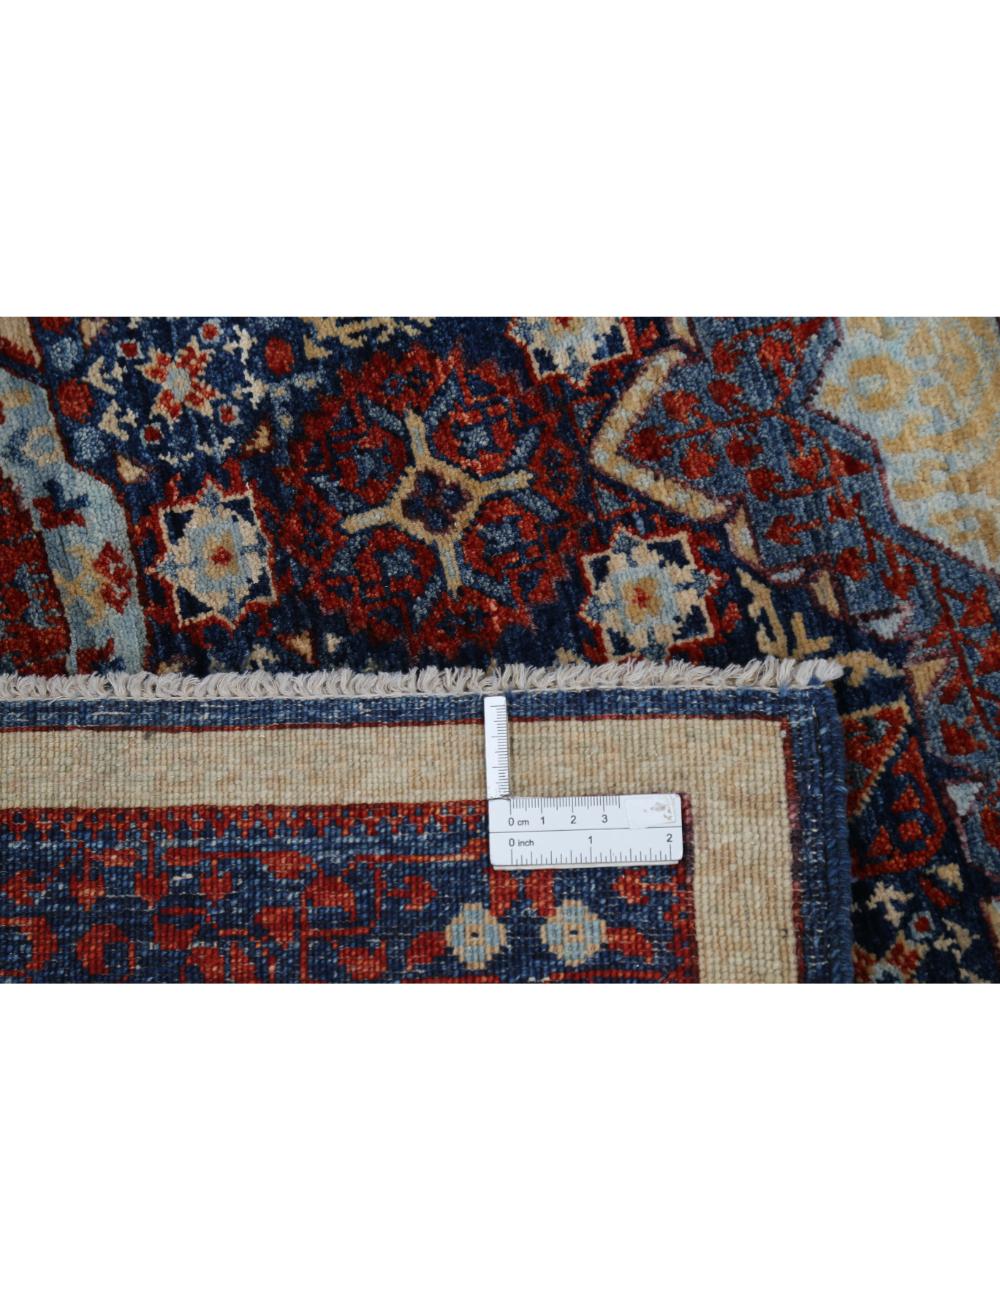 Mamluk 4' 1" X 5' 11" Hand-Knotted Wool Rug 4' 1" X 5' 11" (124 X 180) / Blue / Red